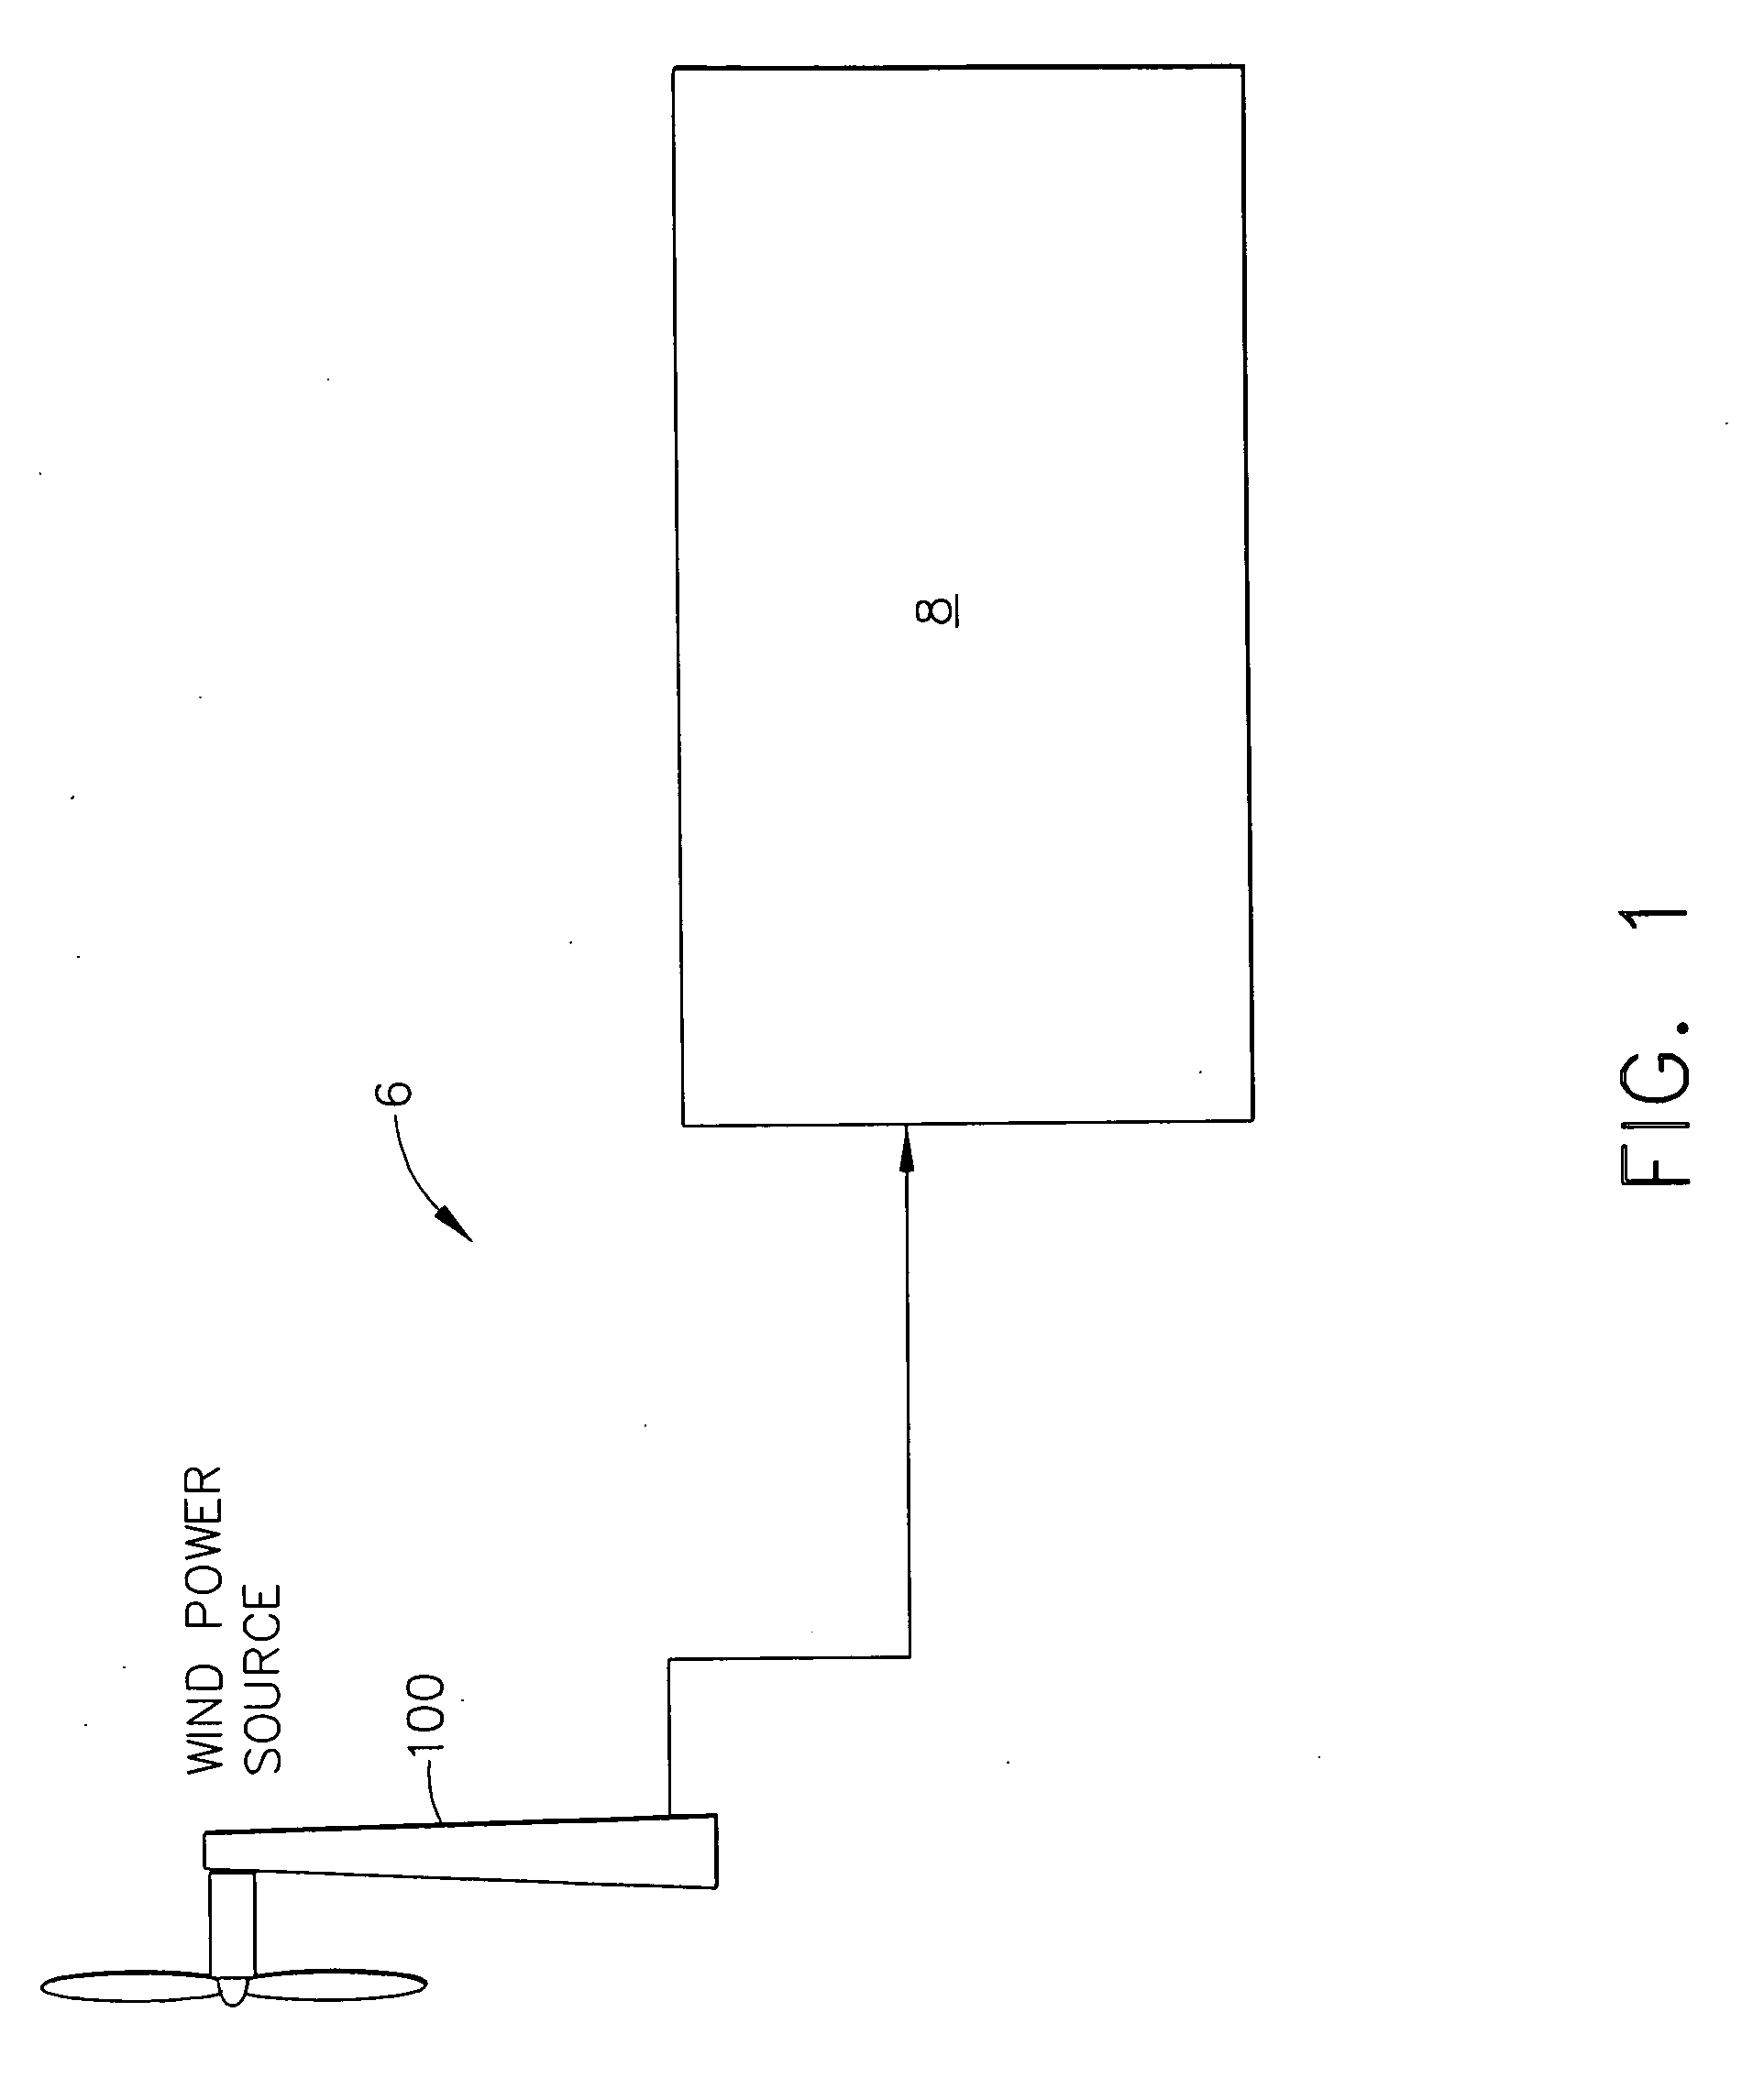 Power generation systems and method of operating same